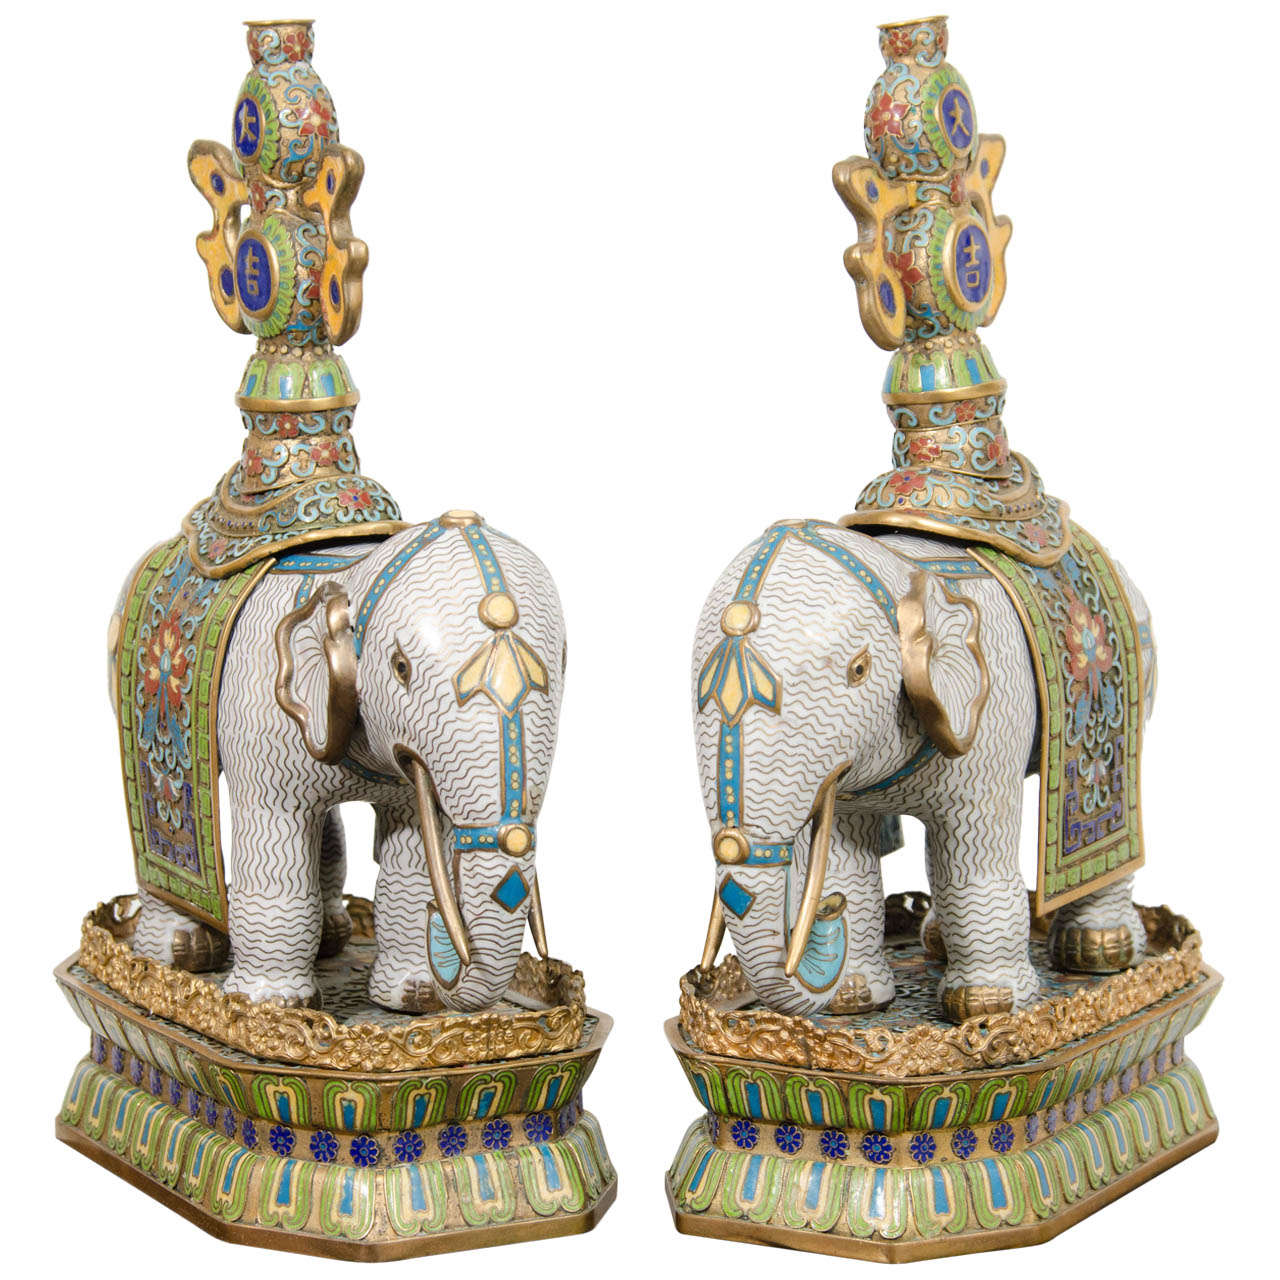 A Pair of Qing Dynasty Gilt Bronze and Cloisonne Elephants